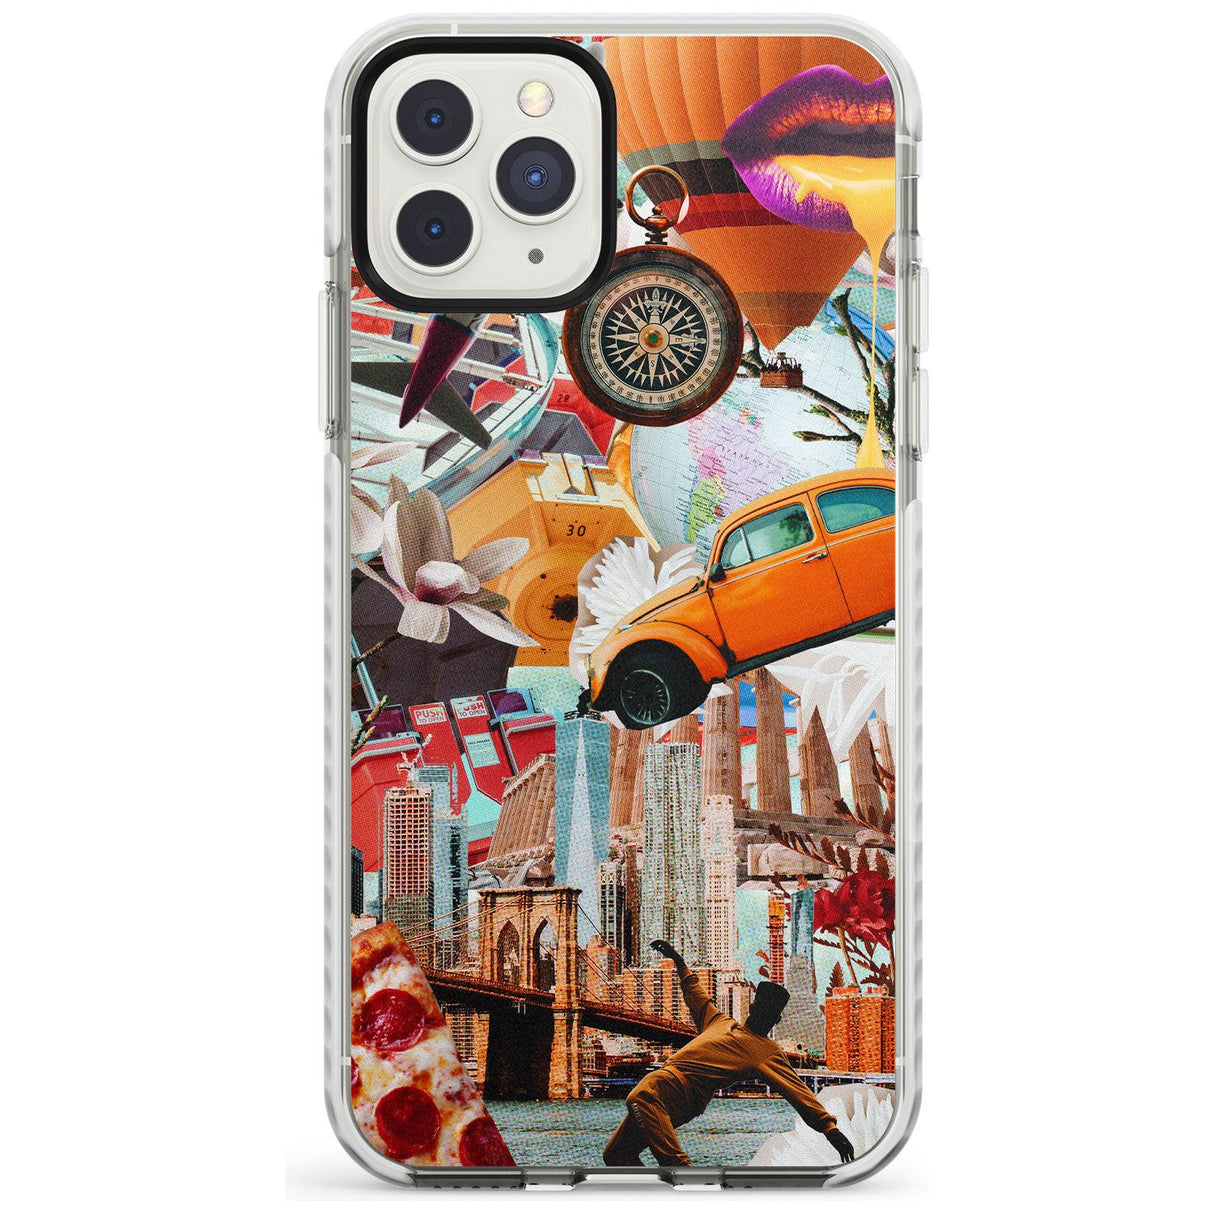 Vintage Collage: New York Mix Impact Phone Case for iPhone 11 Pro Max